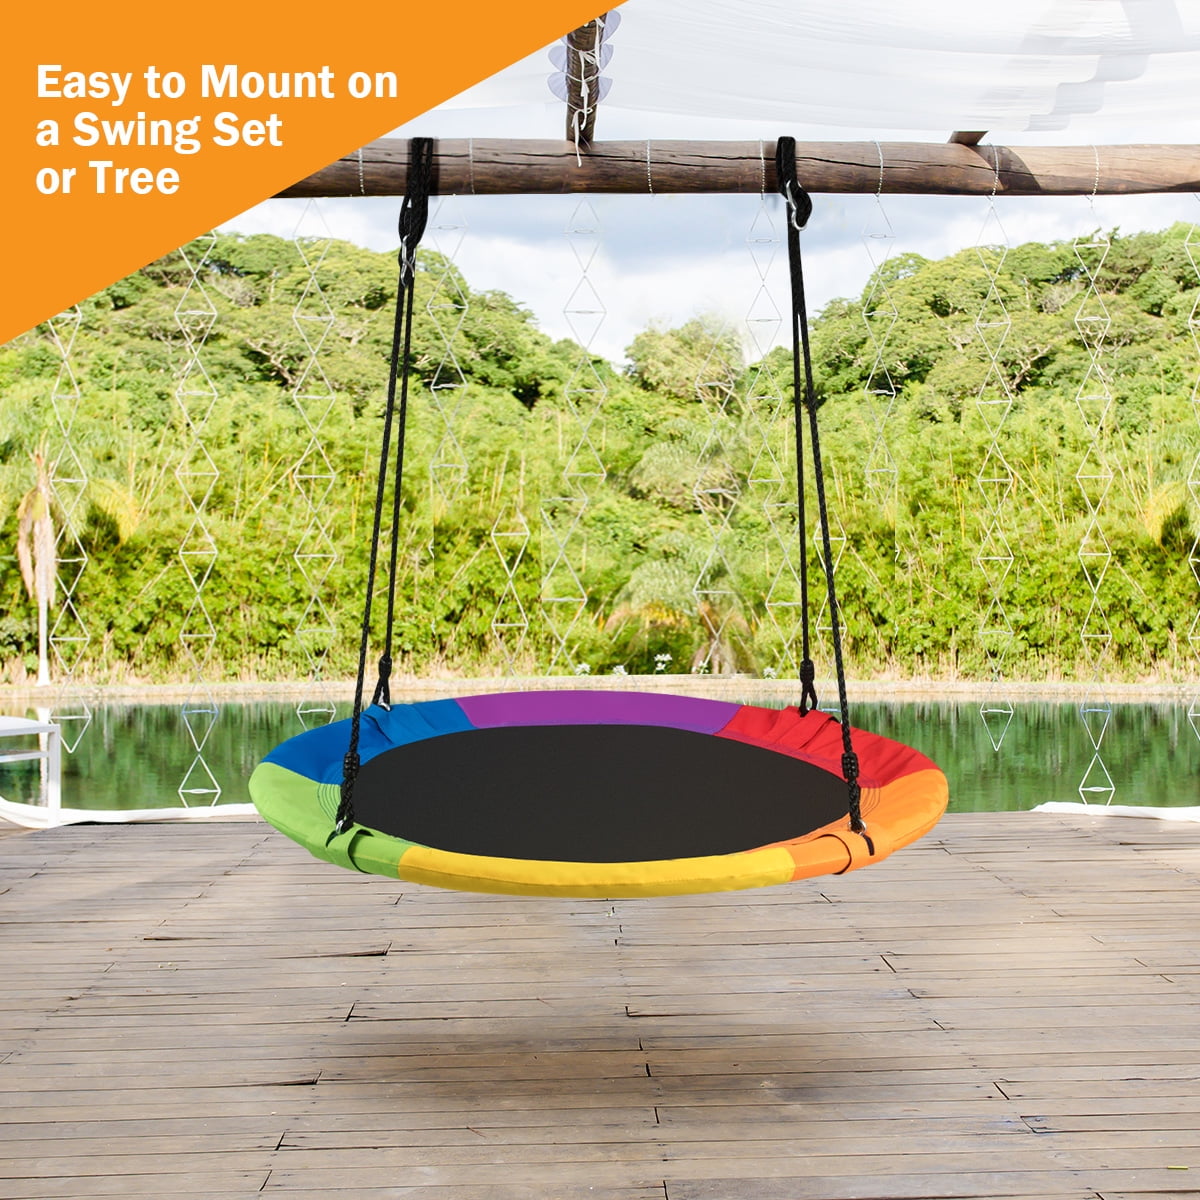 500 Lbs Weight Capacity RedSwing Saucer Tree Swing for Kids Indoor Outdoor Great for Tree Playground Easy to Install Backyard Blue 43 Large Round Swing Swing Set 